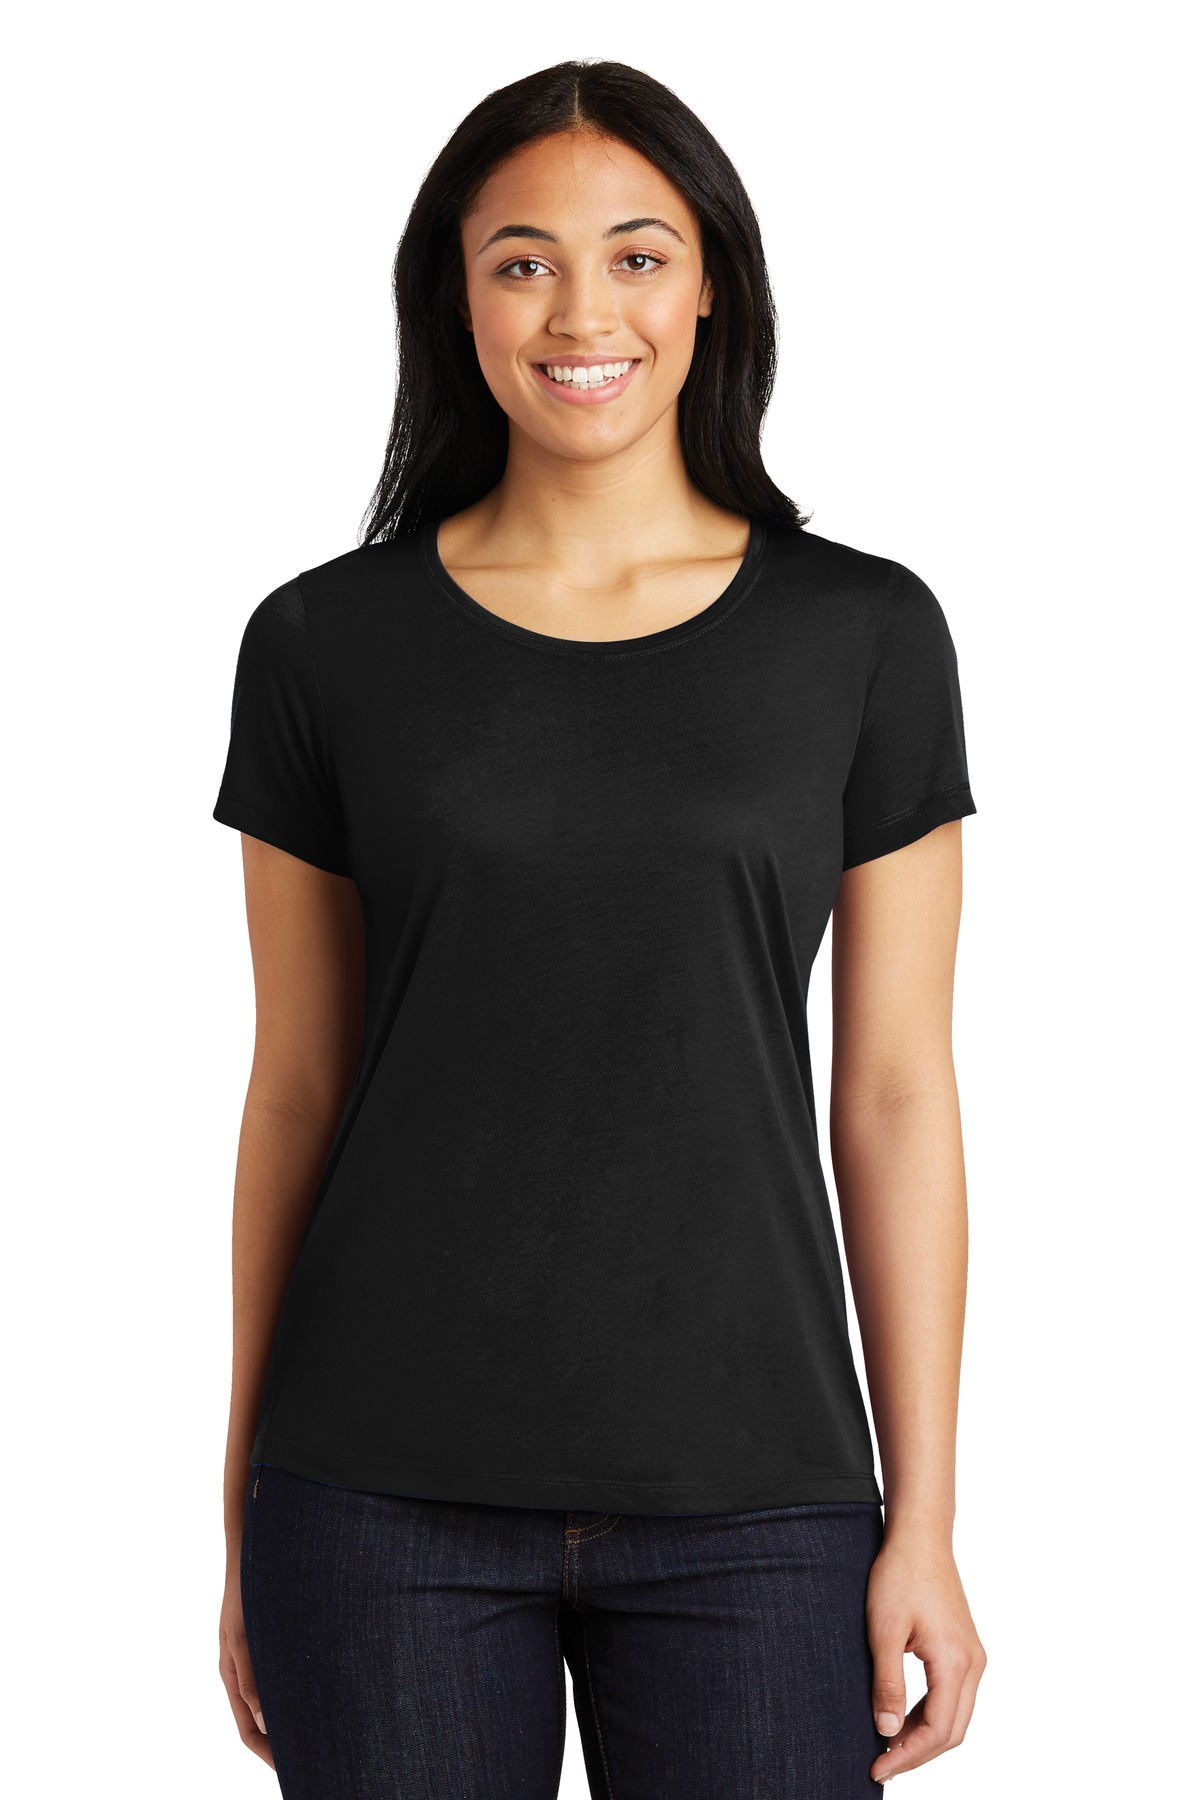 Sport-Tek Ladies PosiCharge Competitor Cotton Touch Scoop Neck Tee-